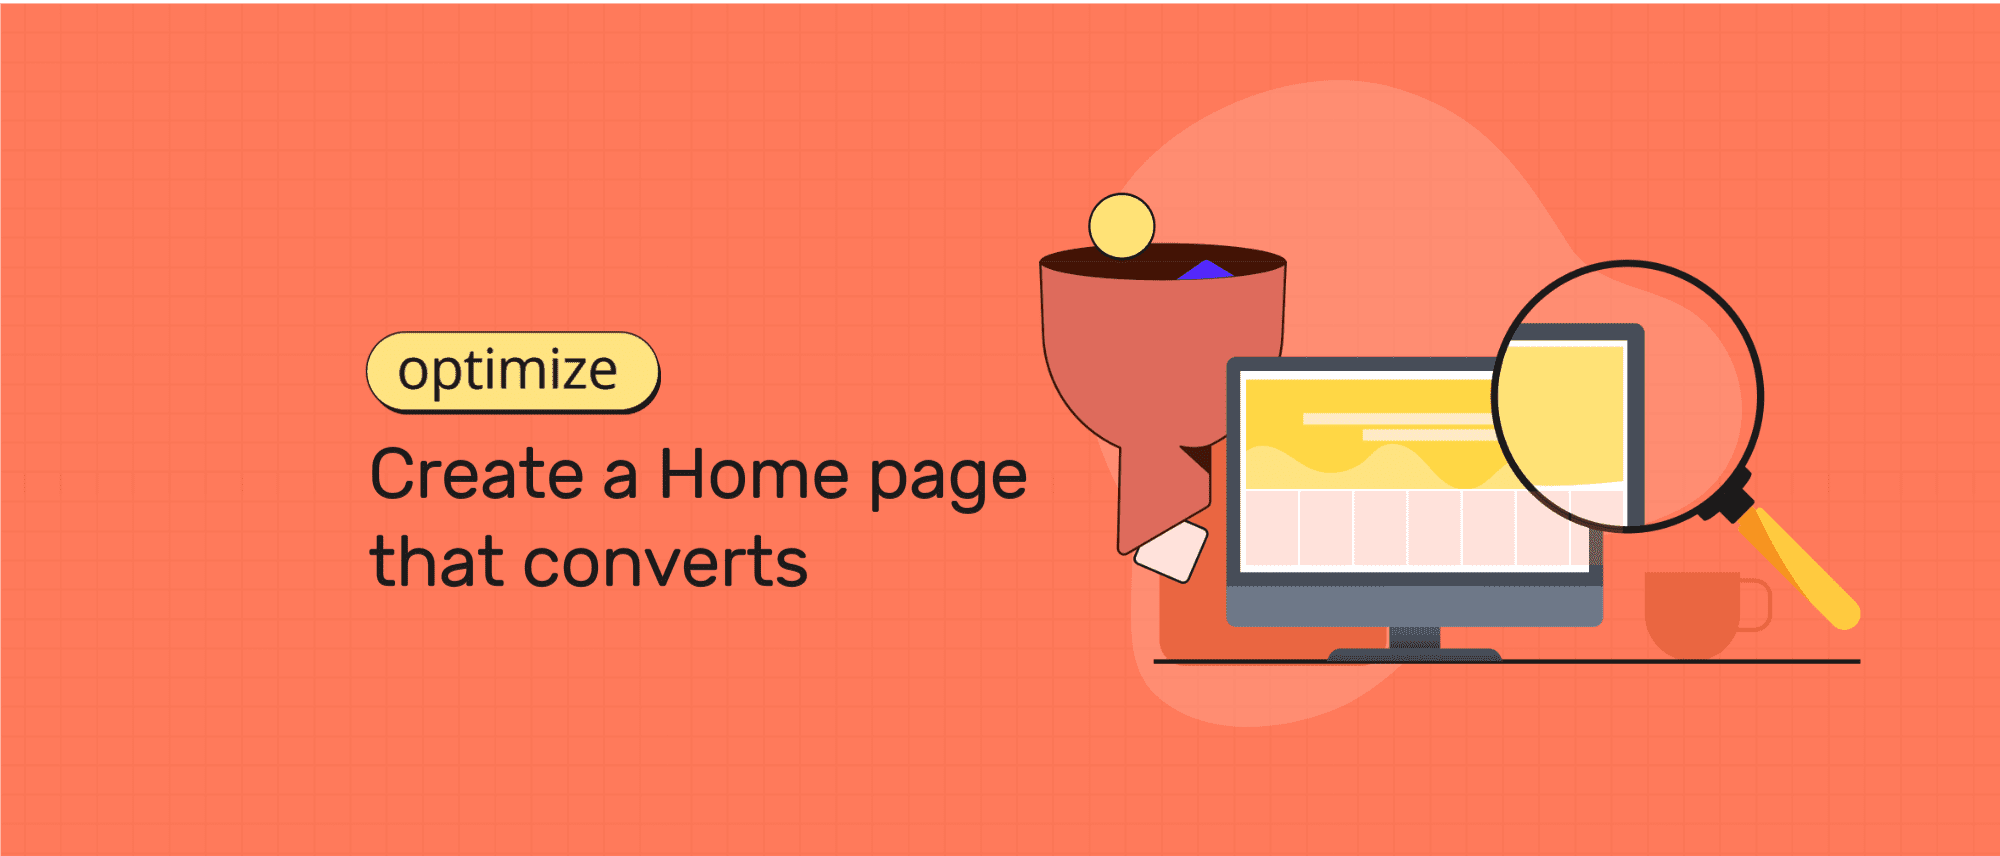 How to optimize your home page for conversions?